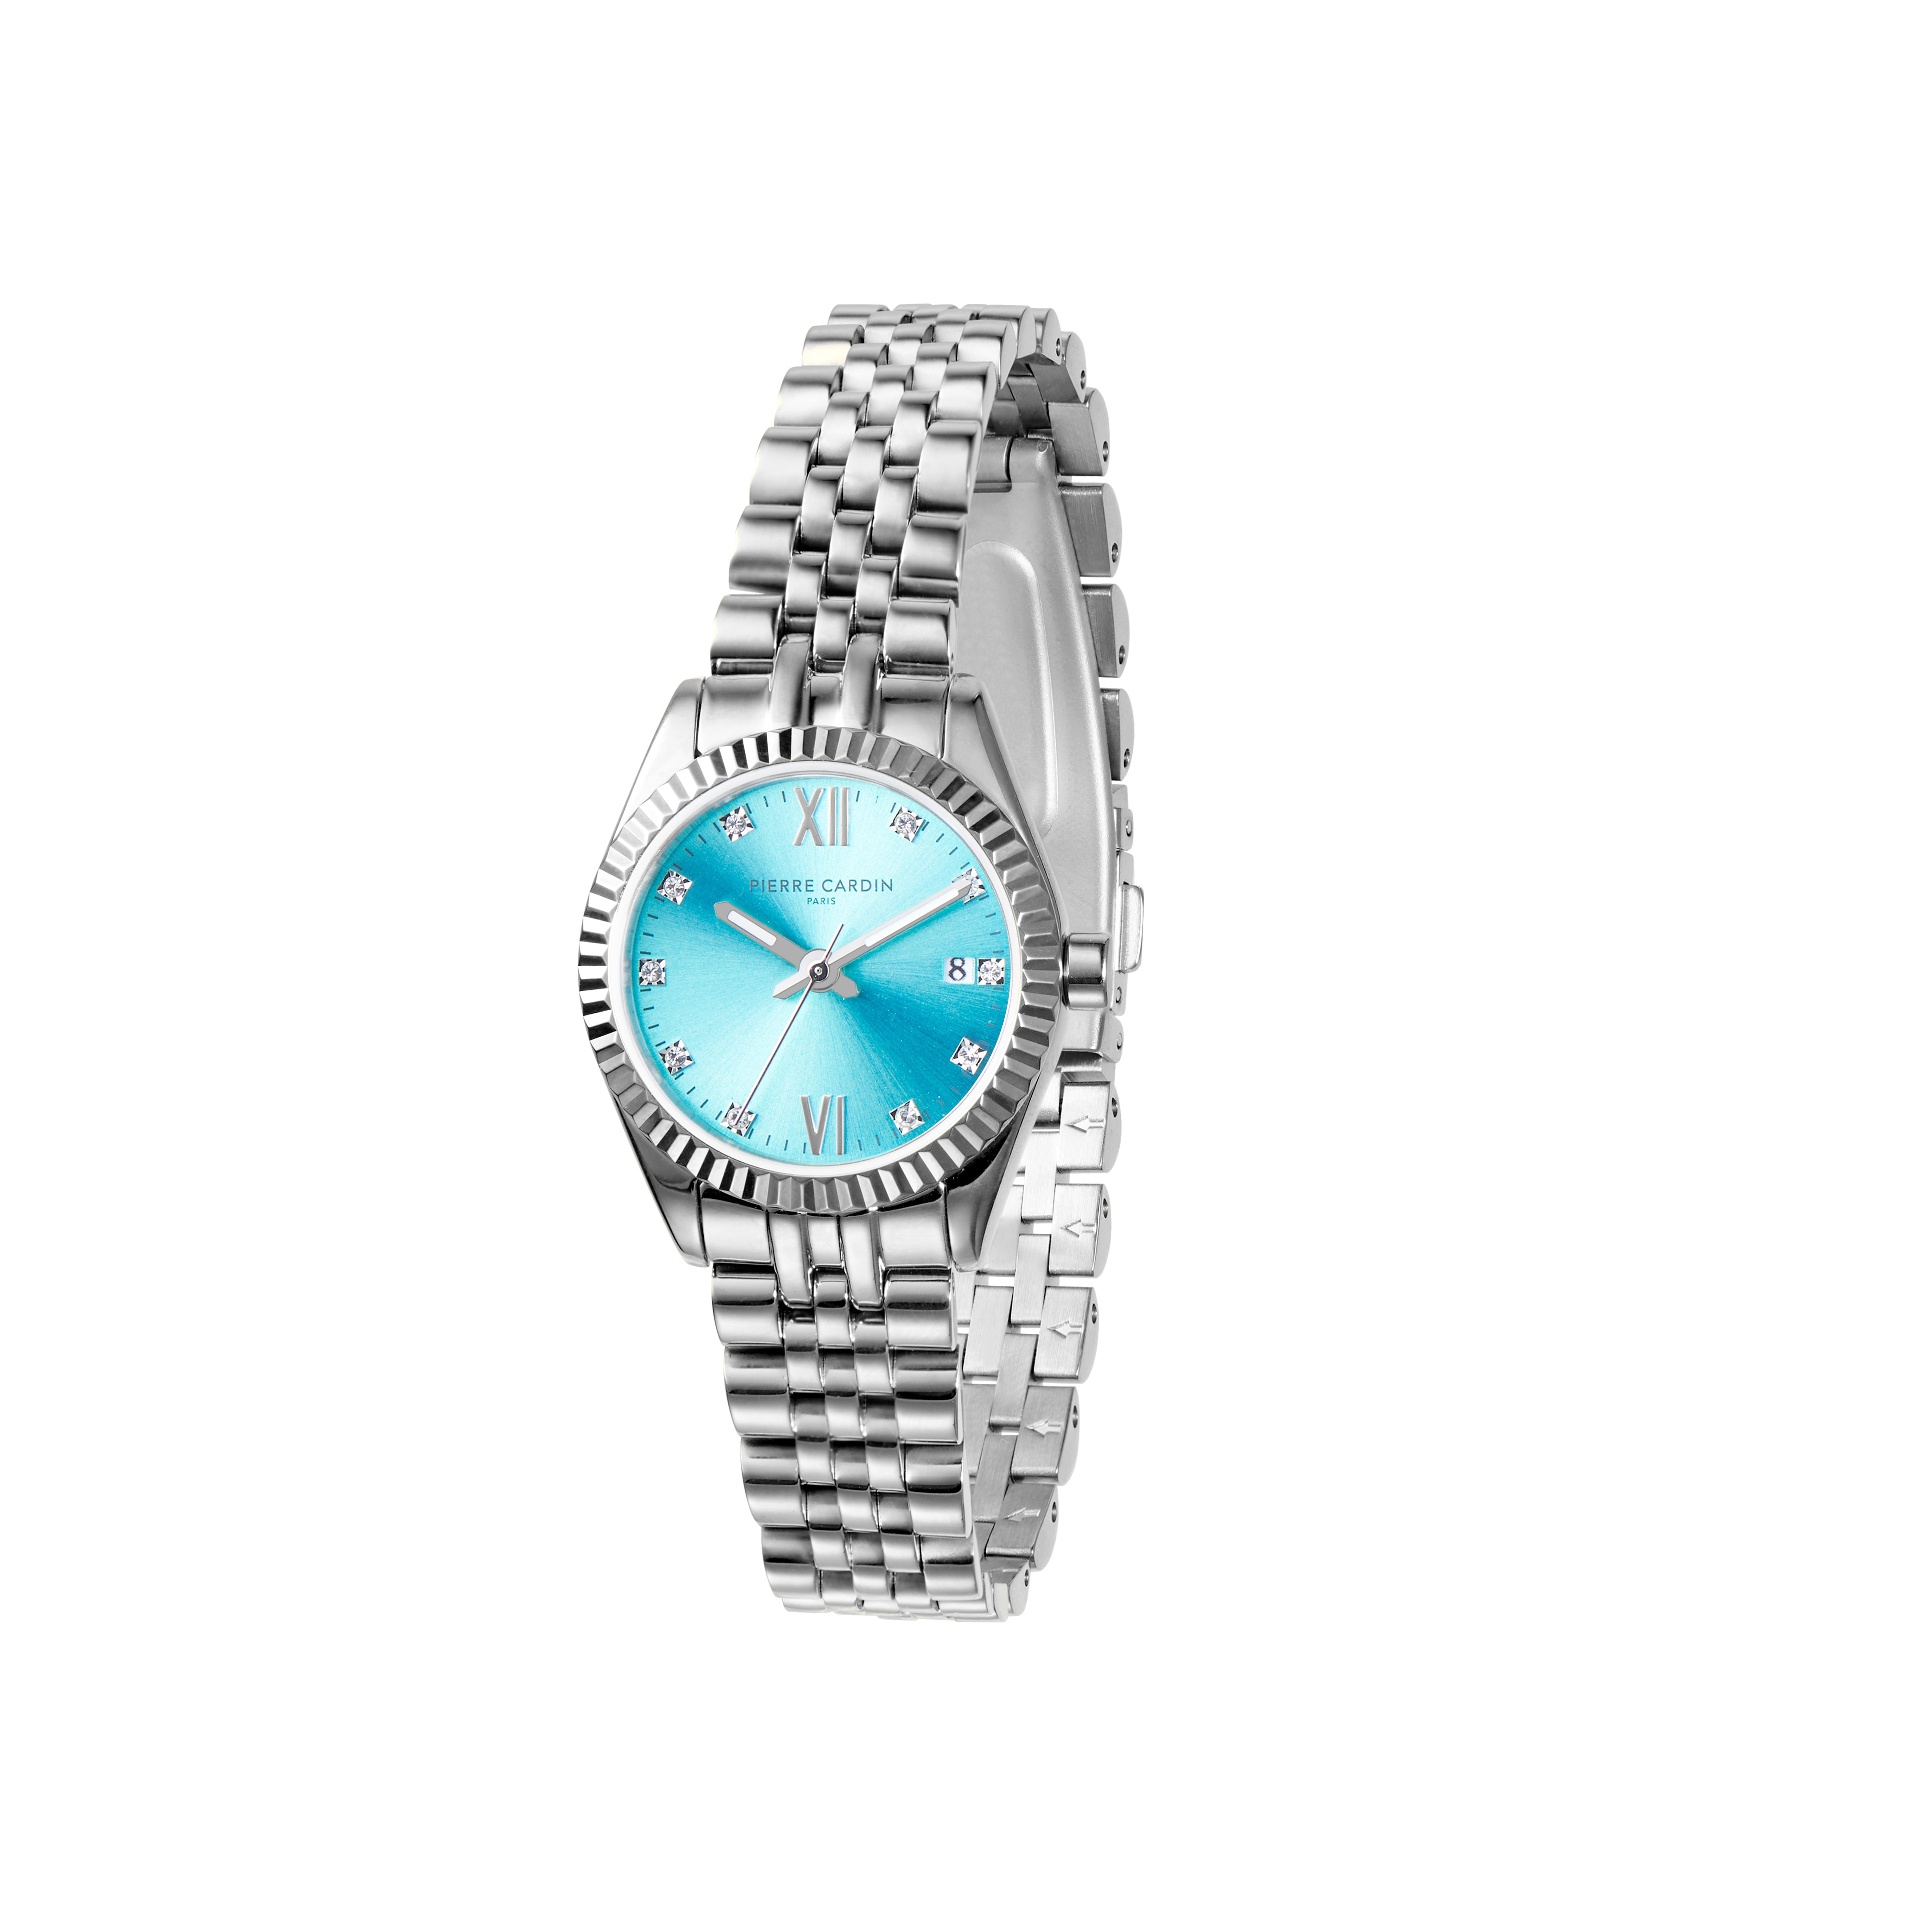 Opera Stainless Steel Date Watch with Fluted Bezel and Crystals on a T